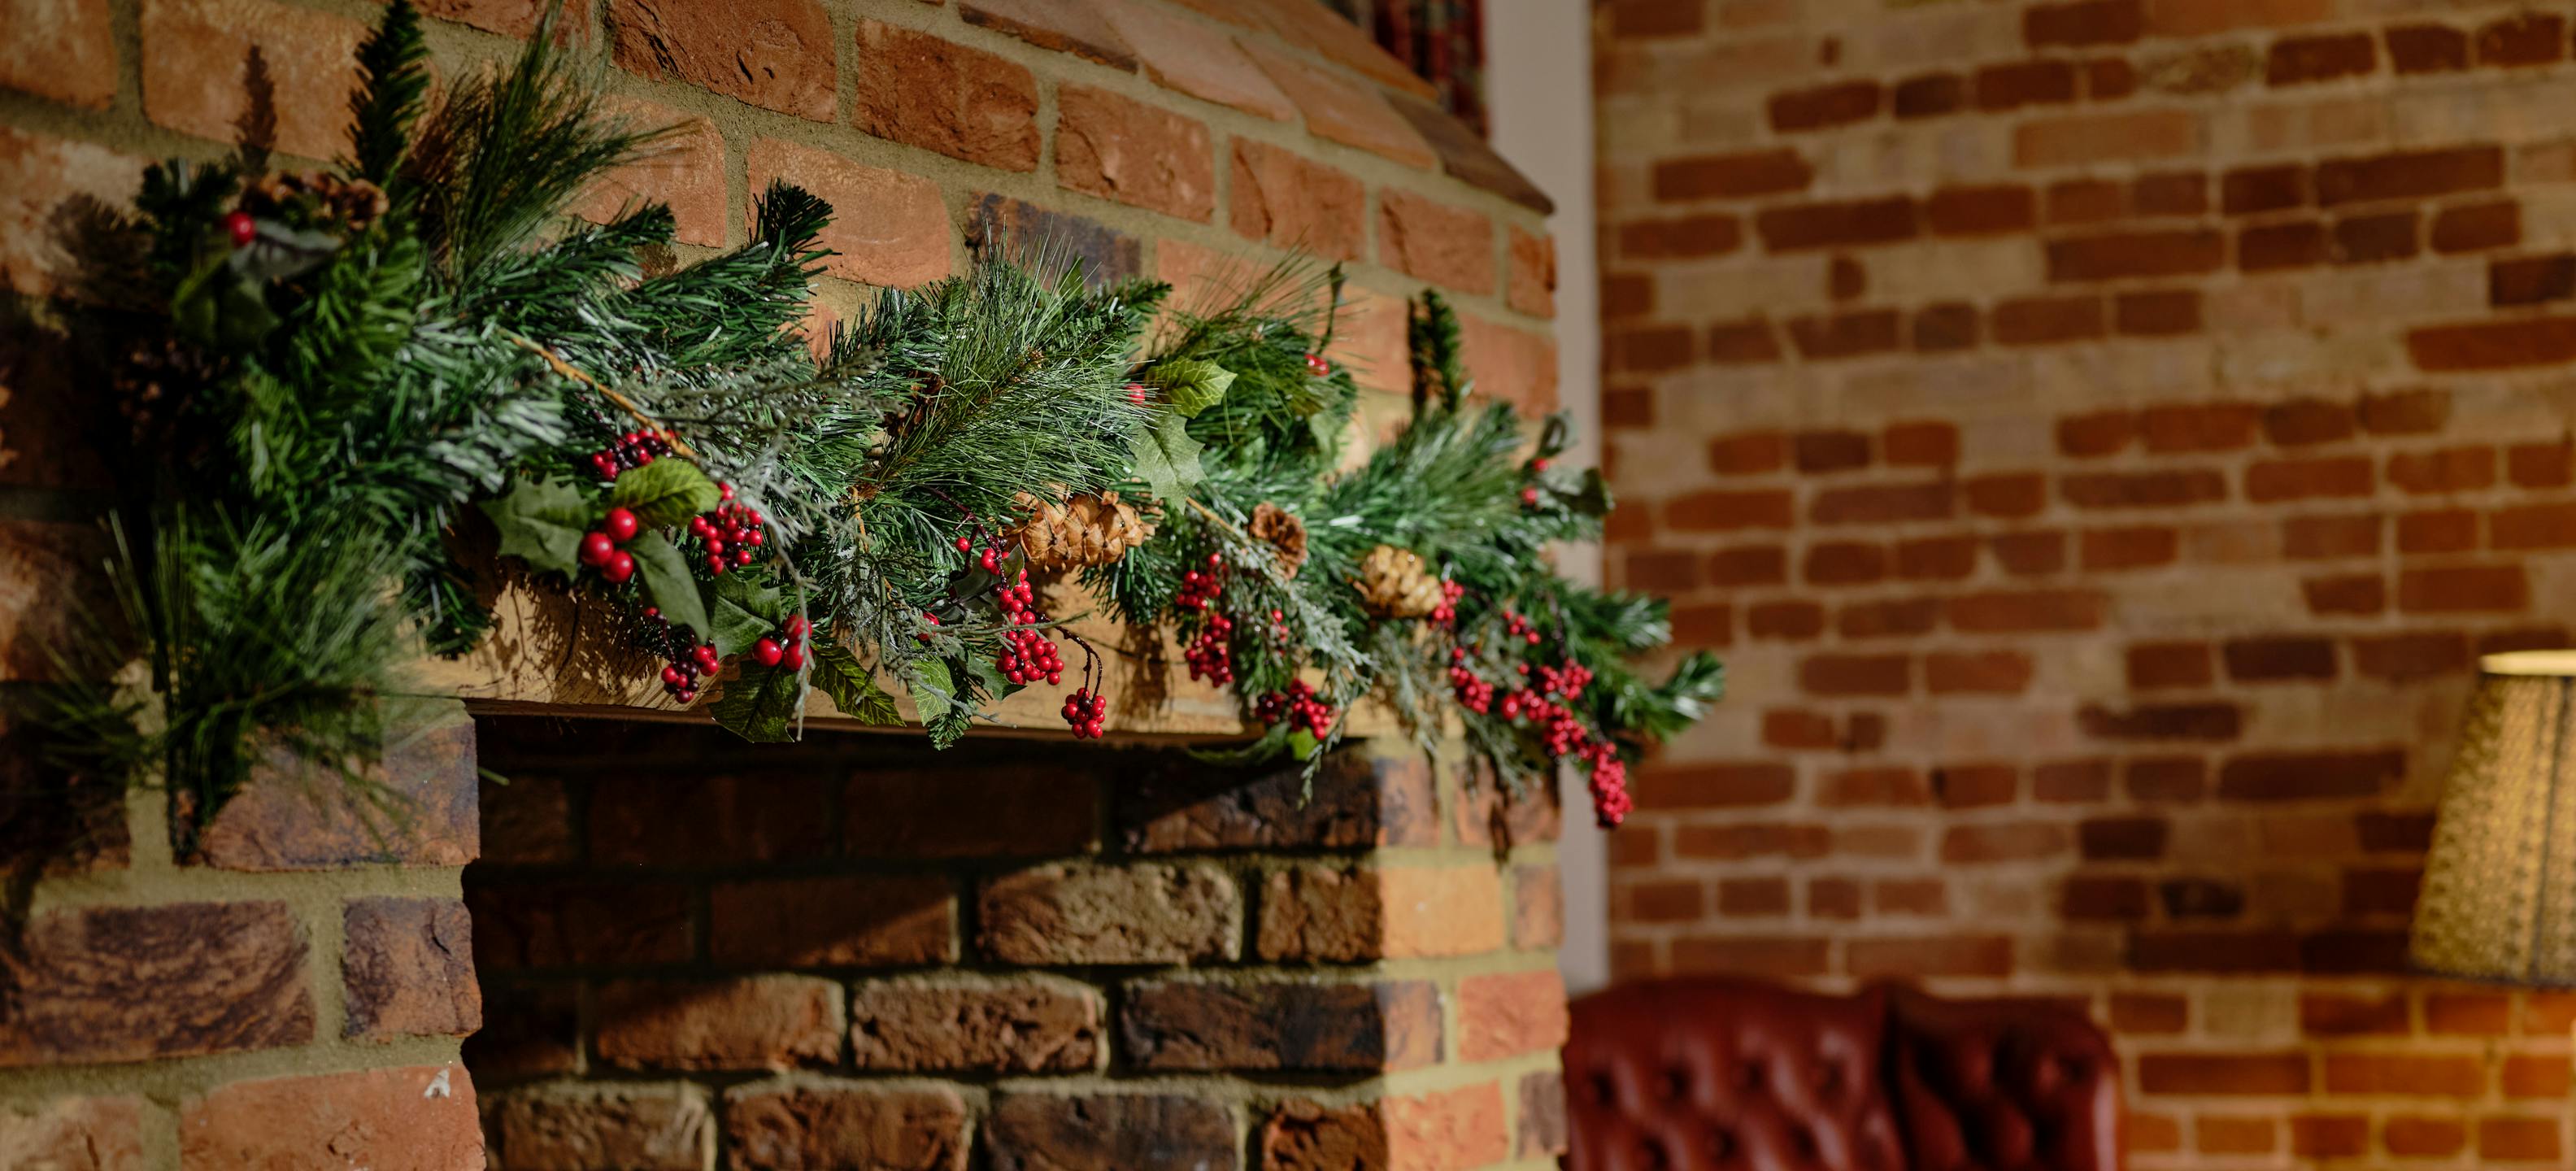 Winter berry style traditional Christmas garland over fireplace